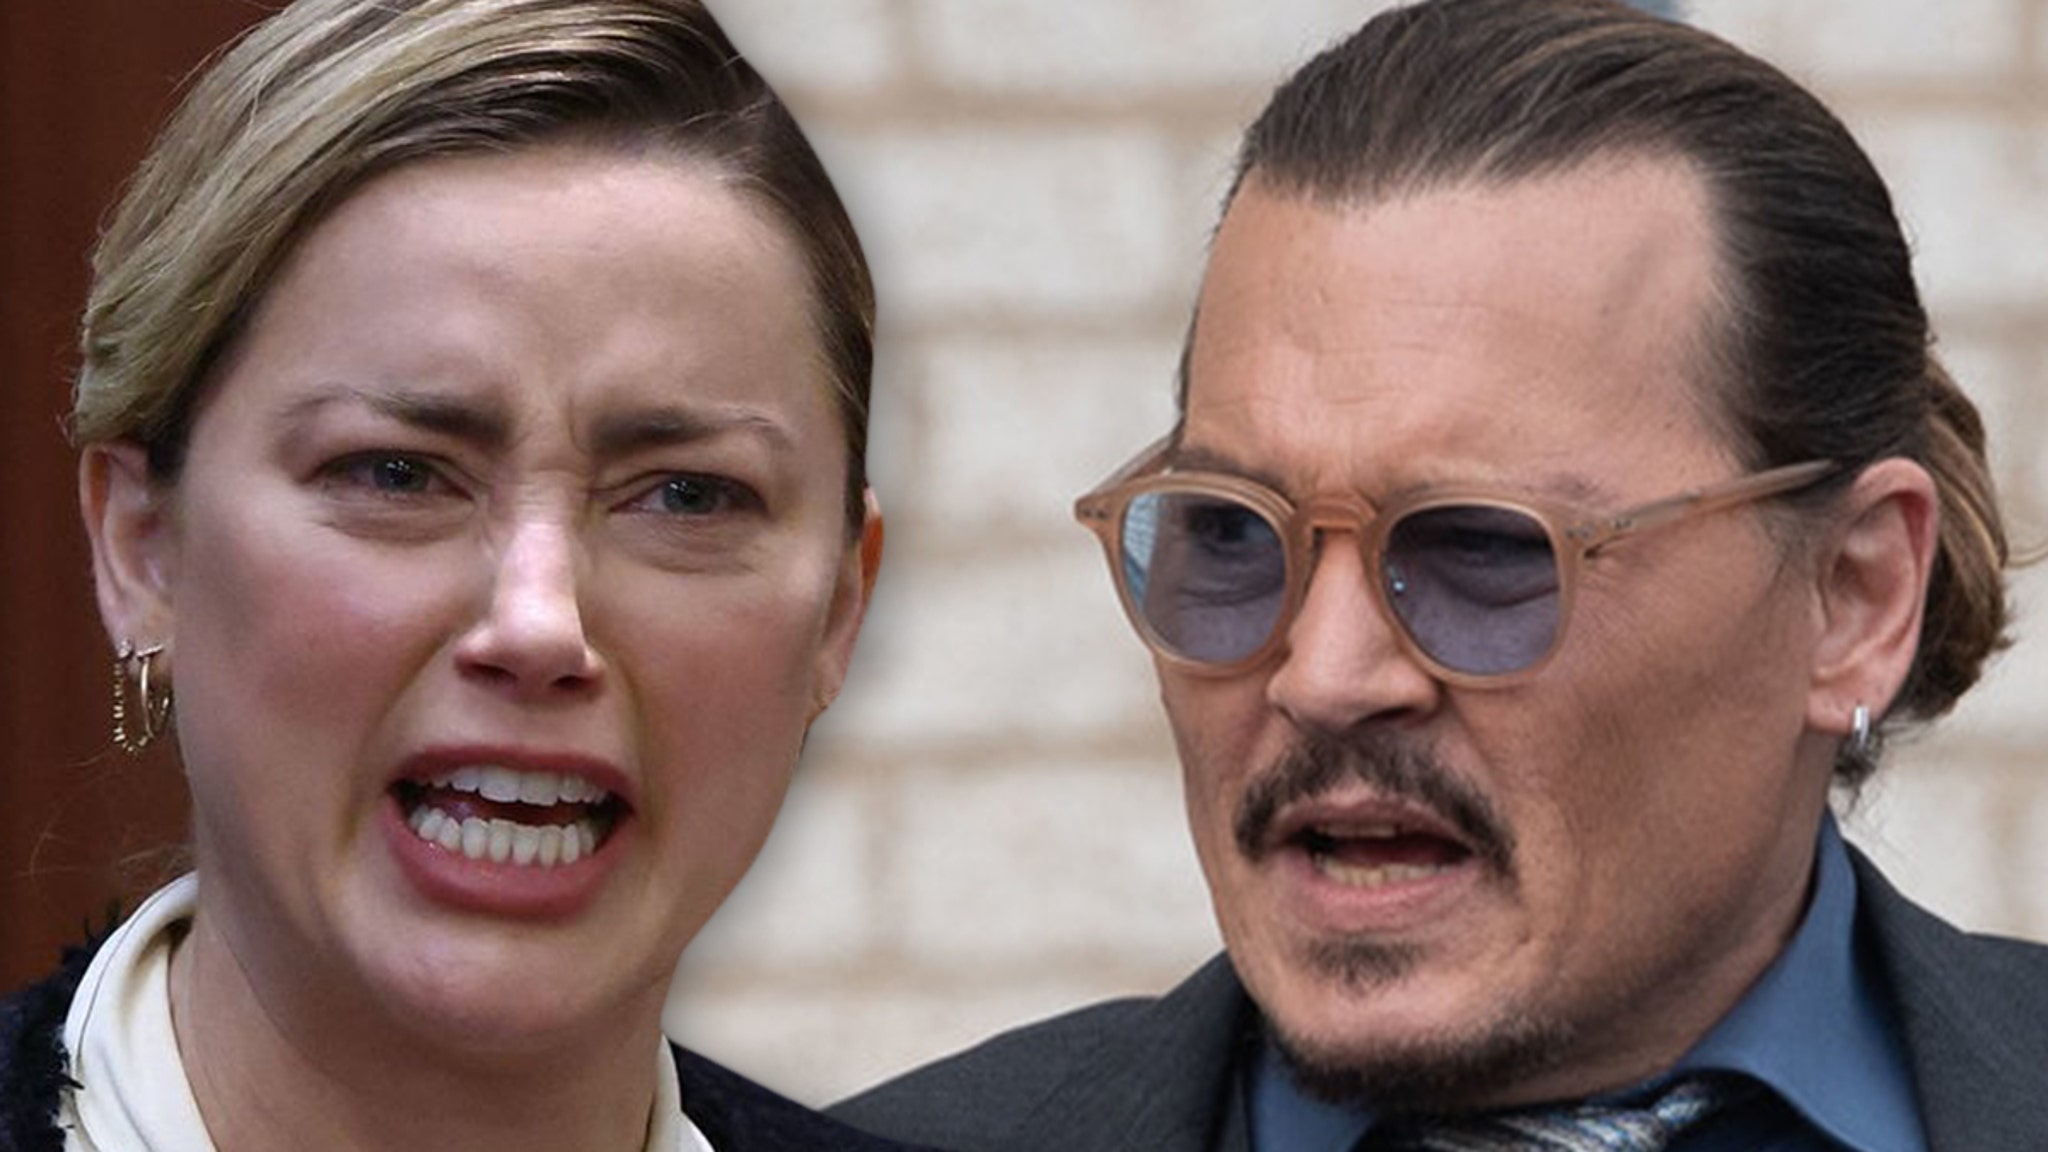 Amber Heard Claims a Juror Who Sided with Depp Fraudulently Seated on Panel